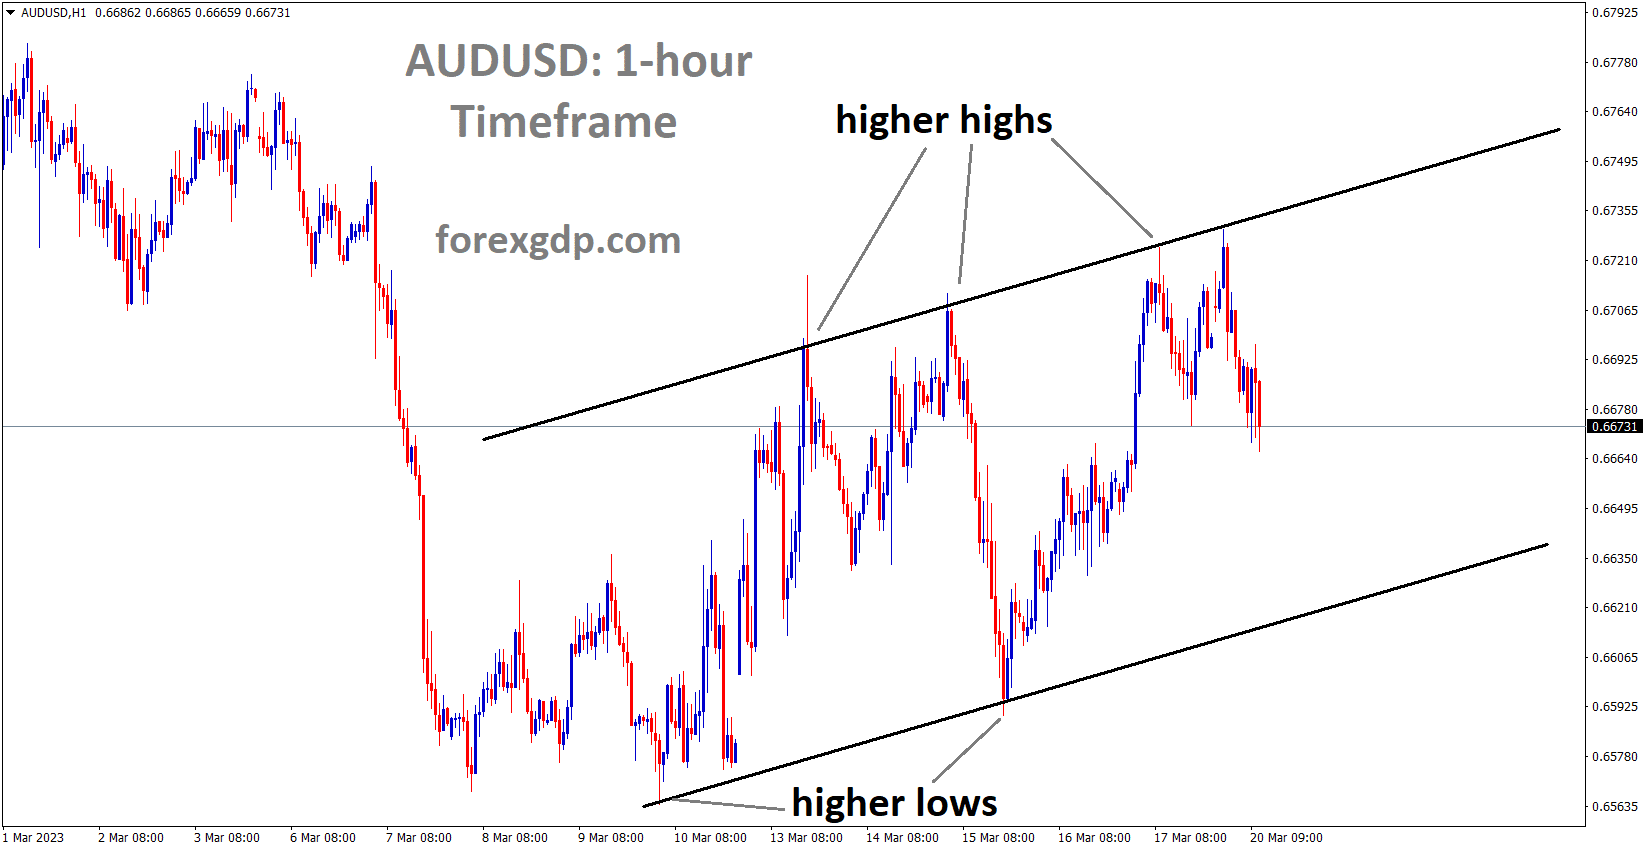 AUDUSD is moving in an Ascending channel and the market has fallen from the higher high area of the channel